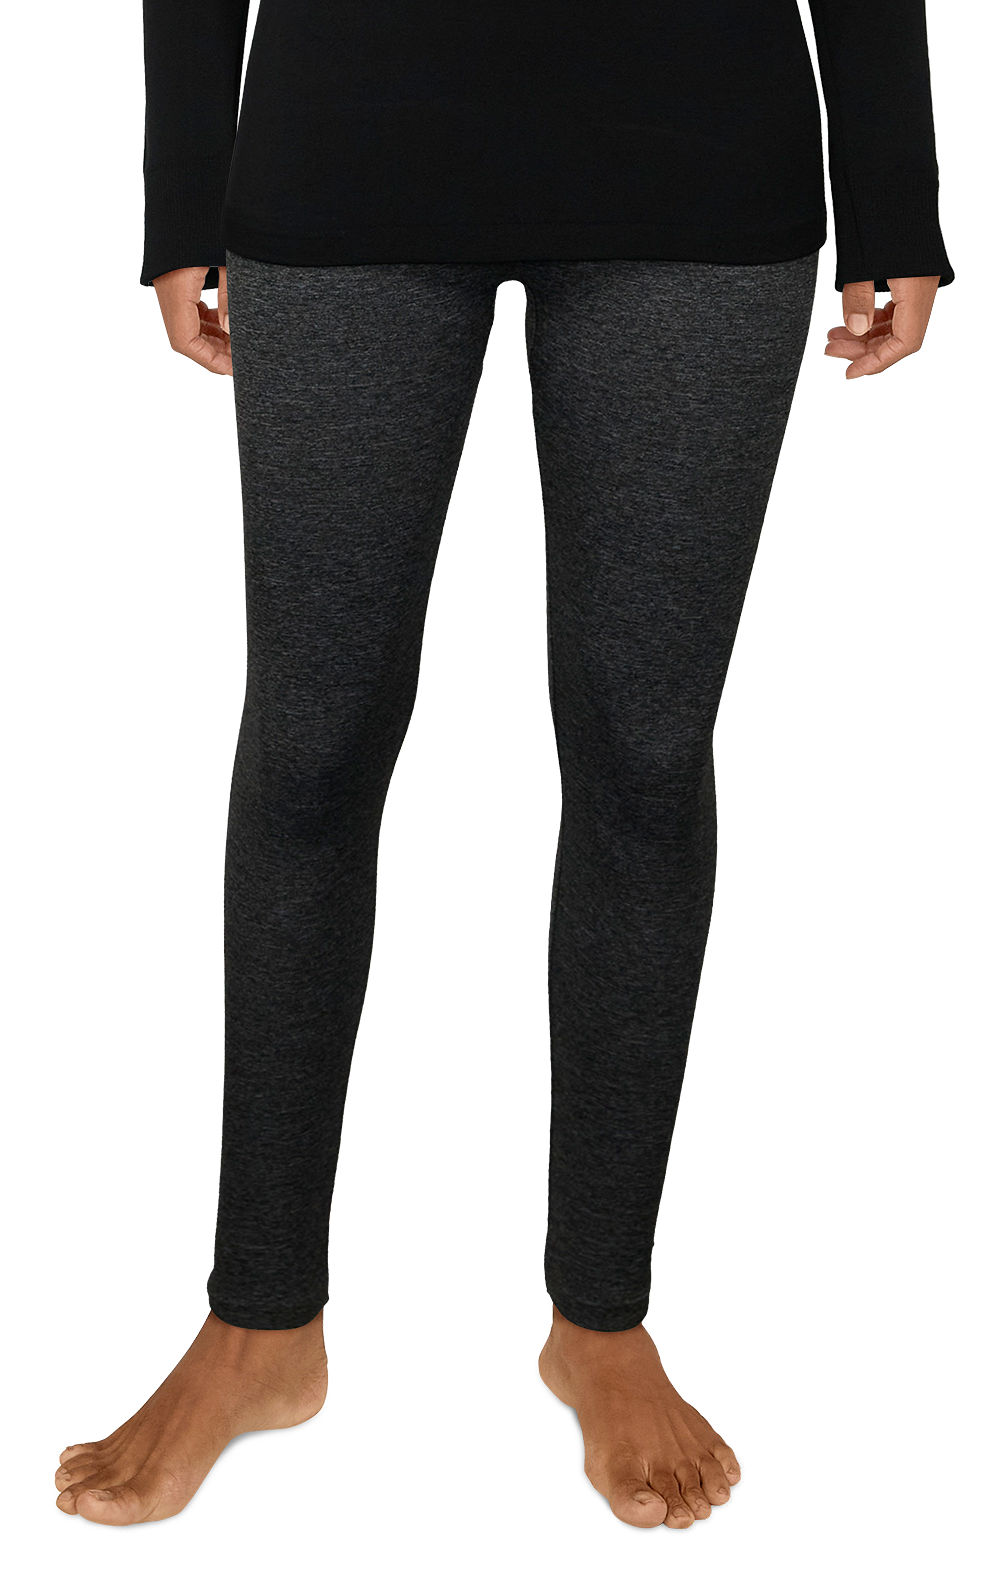 Natural Reflections Seamless Leggings for Ladies